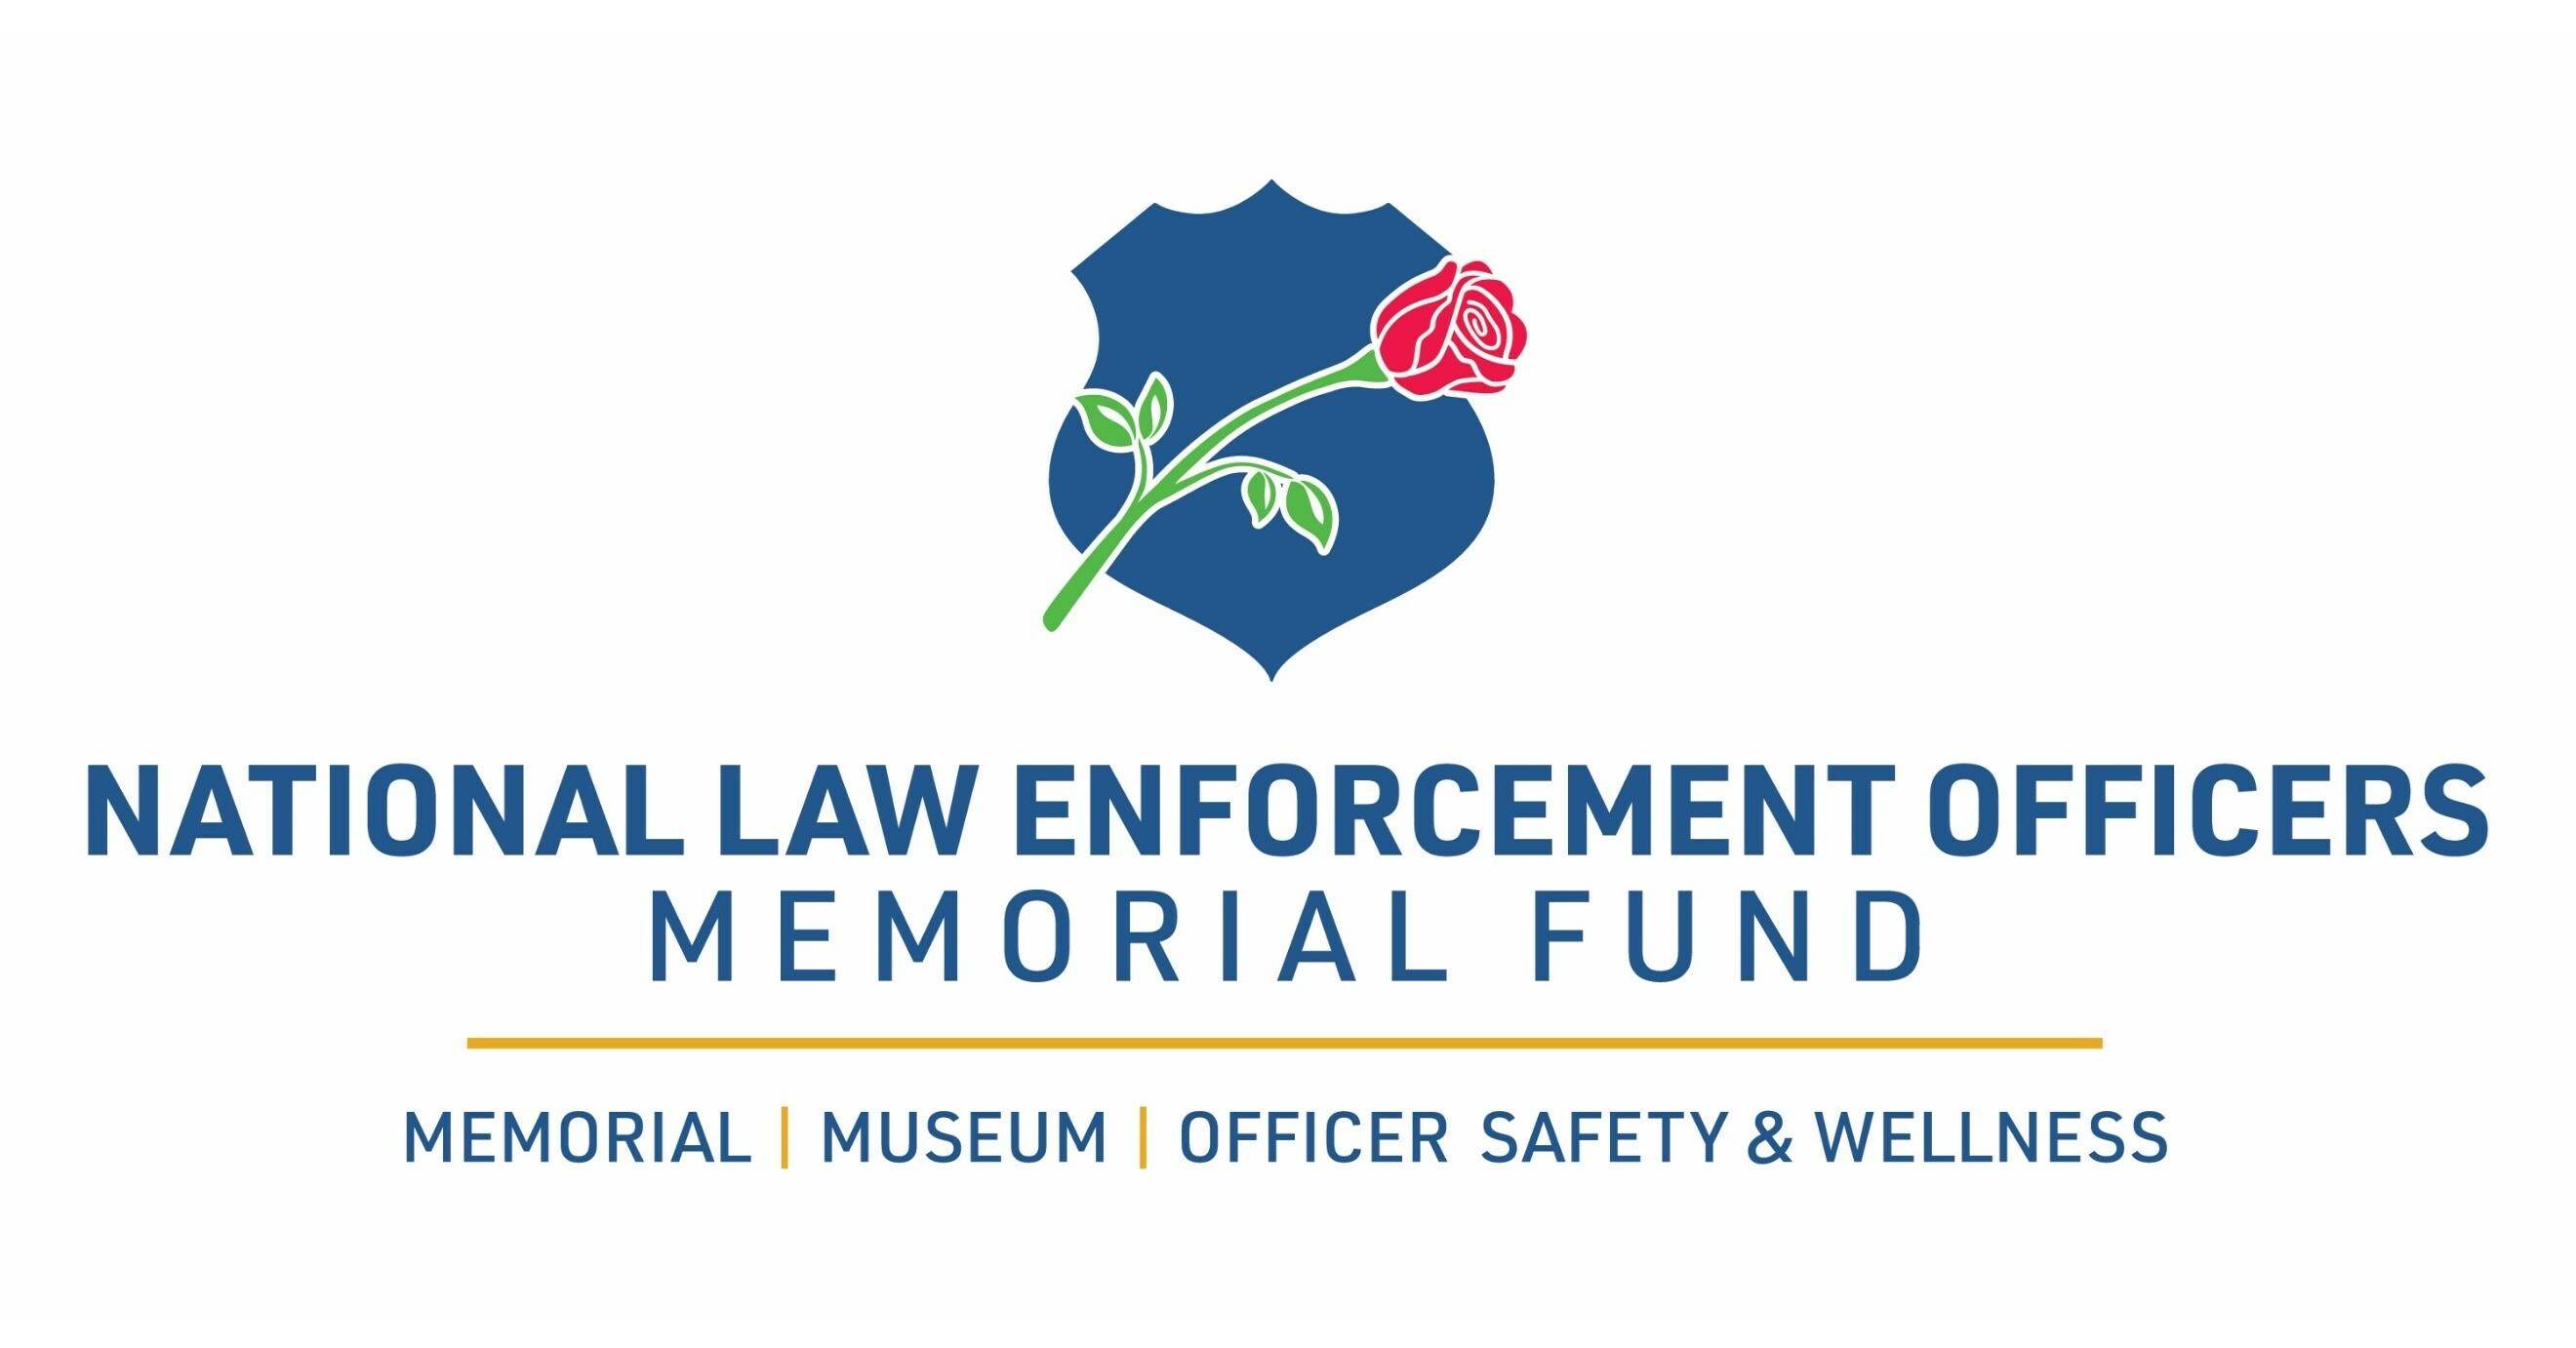 Fallen Law Enforcement Officers To Be Honored During 34th Annual Candlelight Vigil On May 13 In 4881